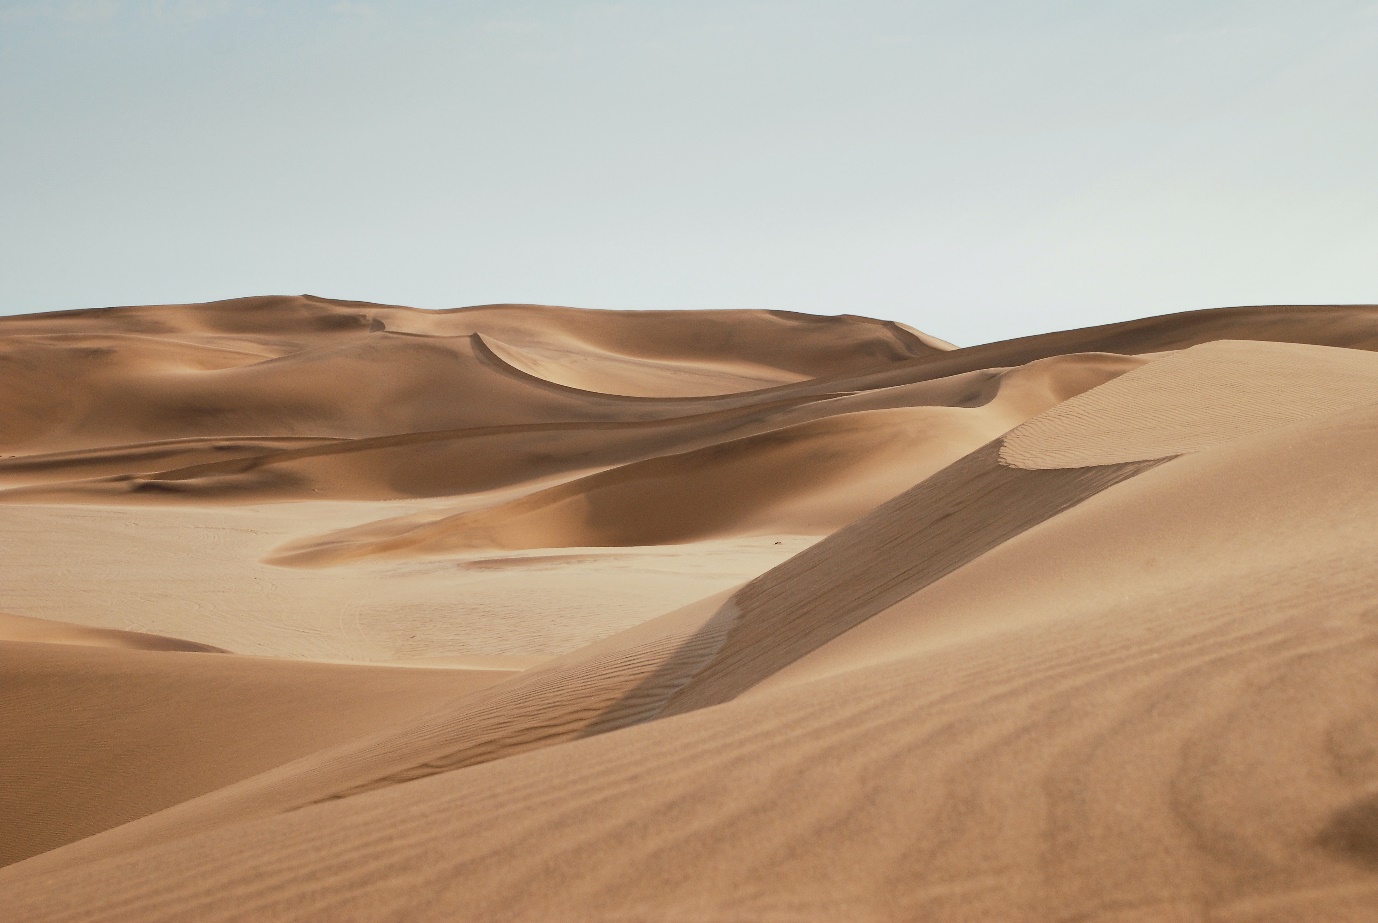 A picture containing nature, dune, sand, aeolian landform

Description automatically generated